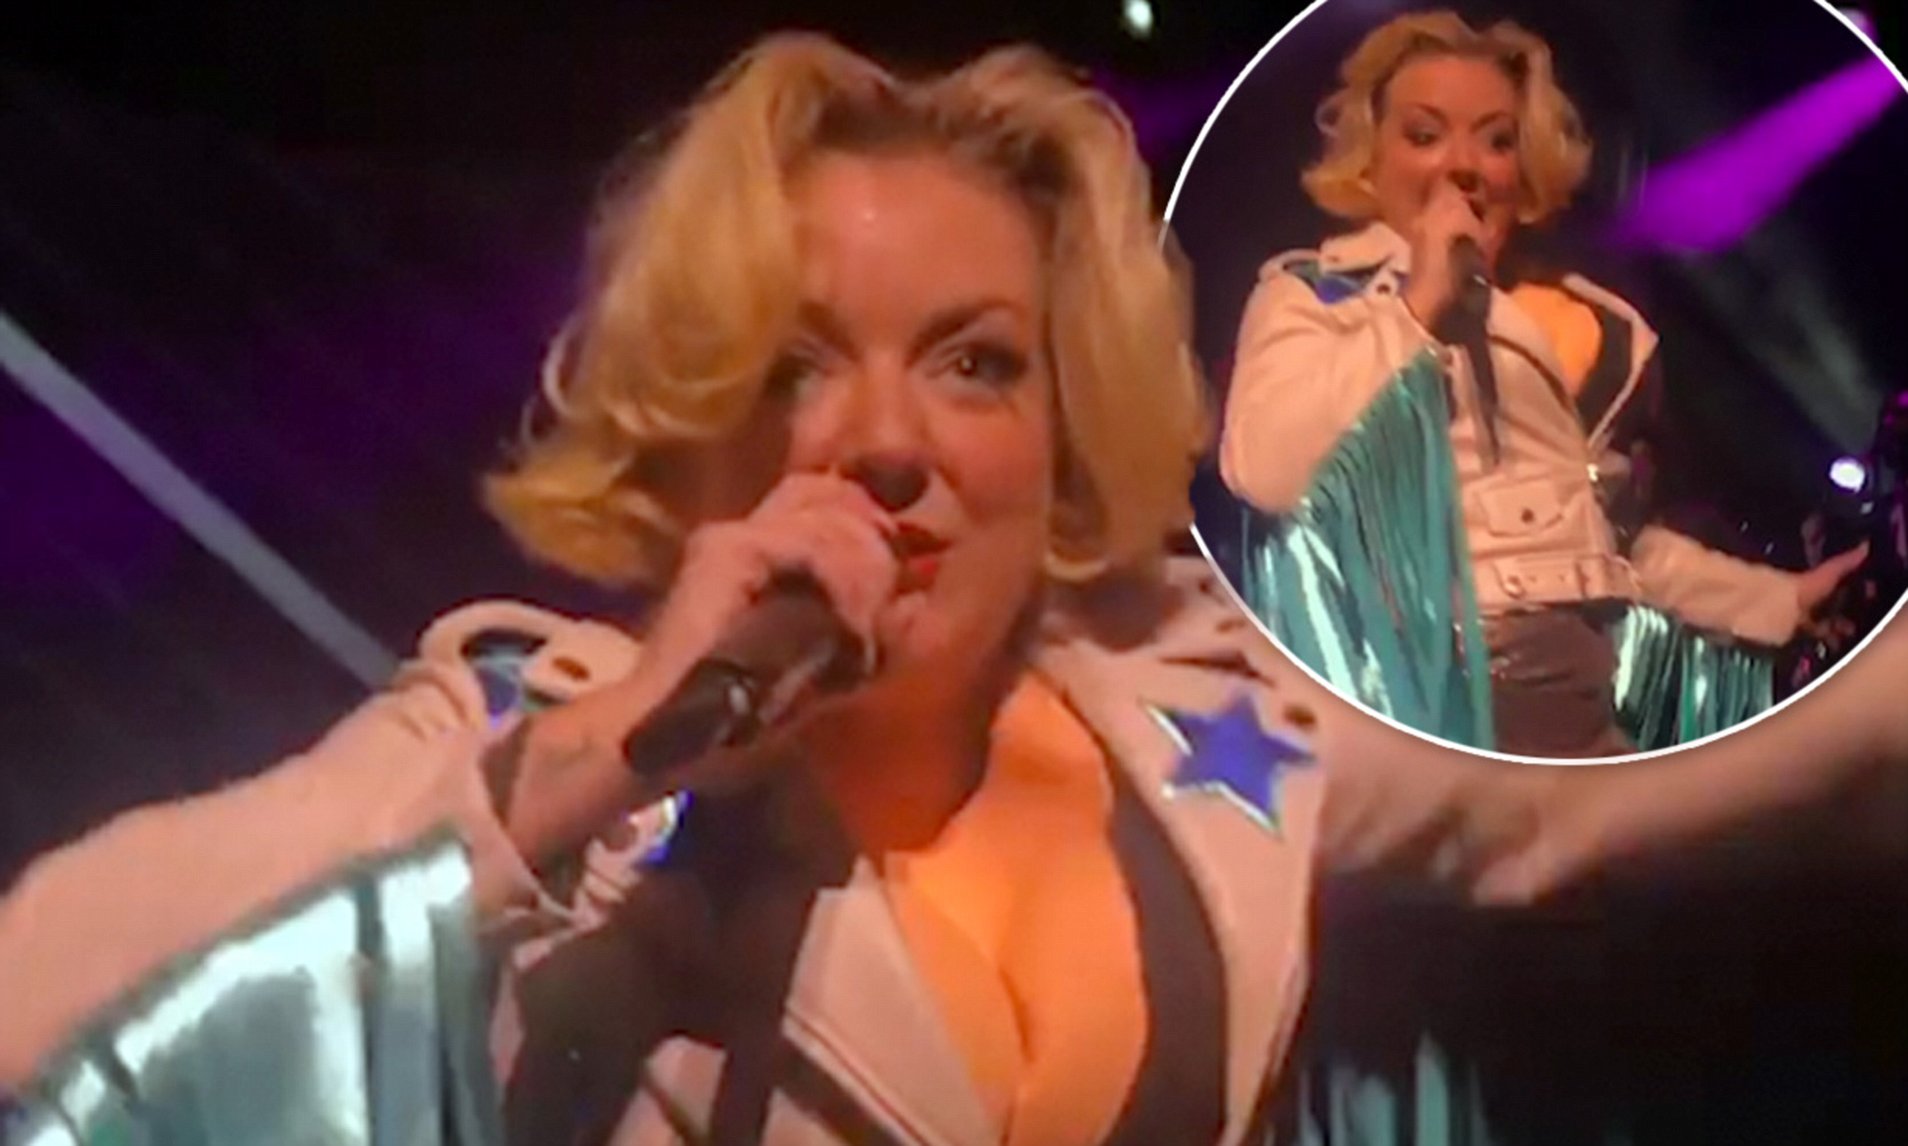 Tits out sheridan smith